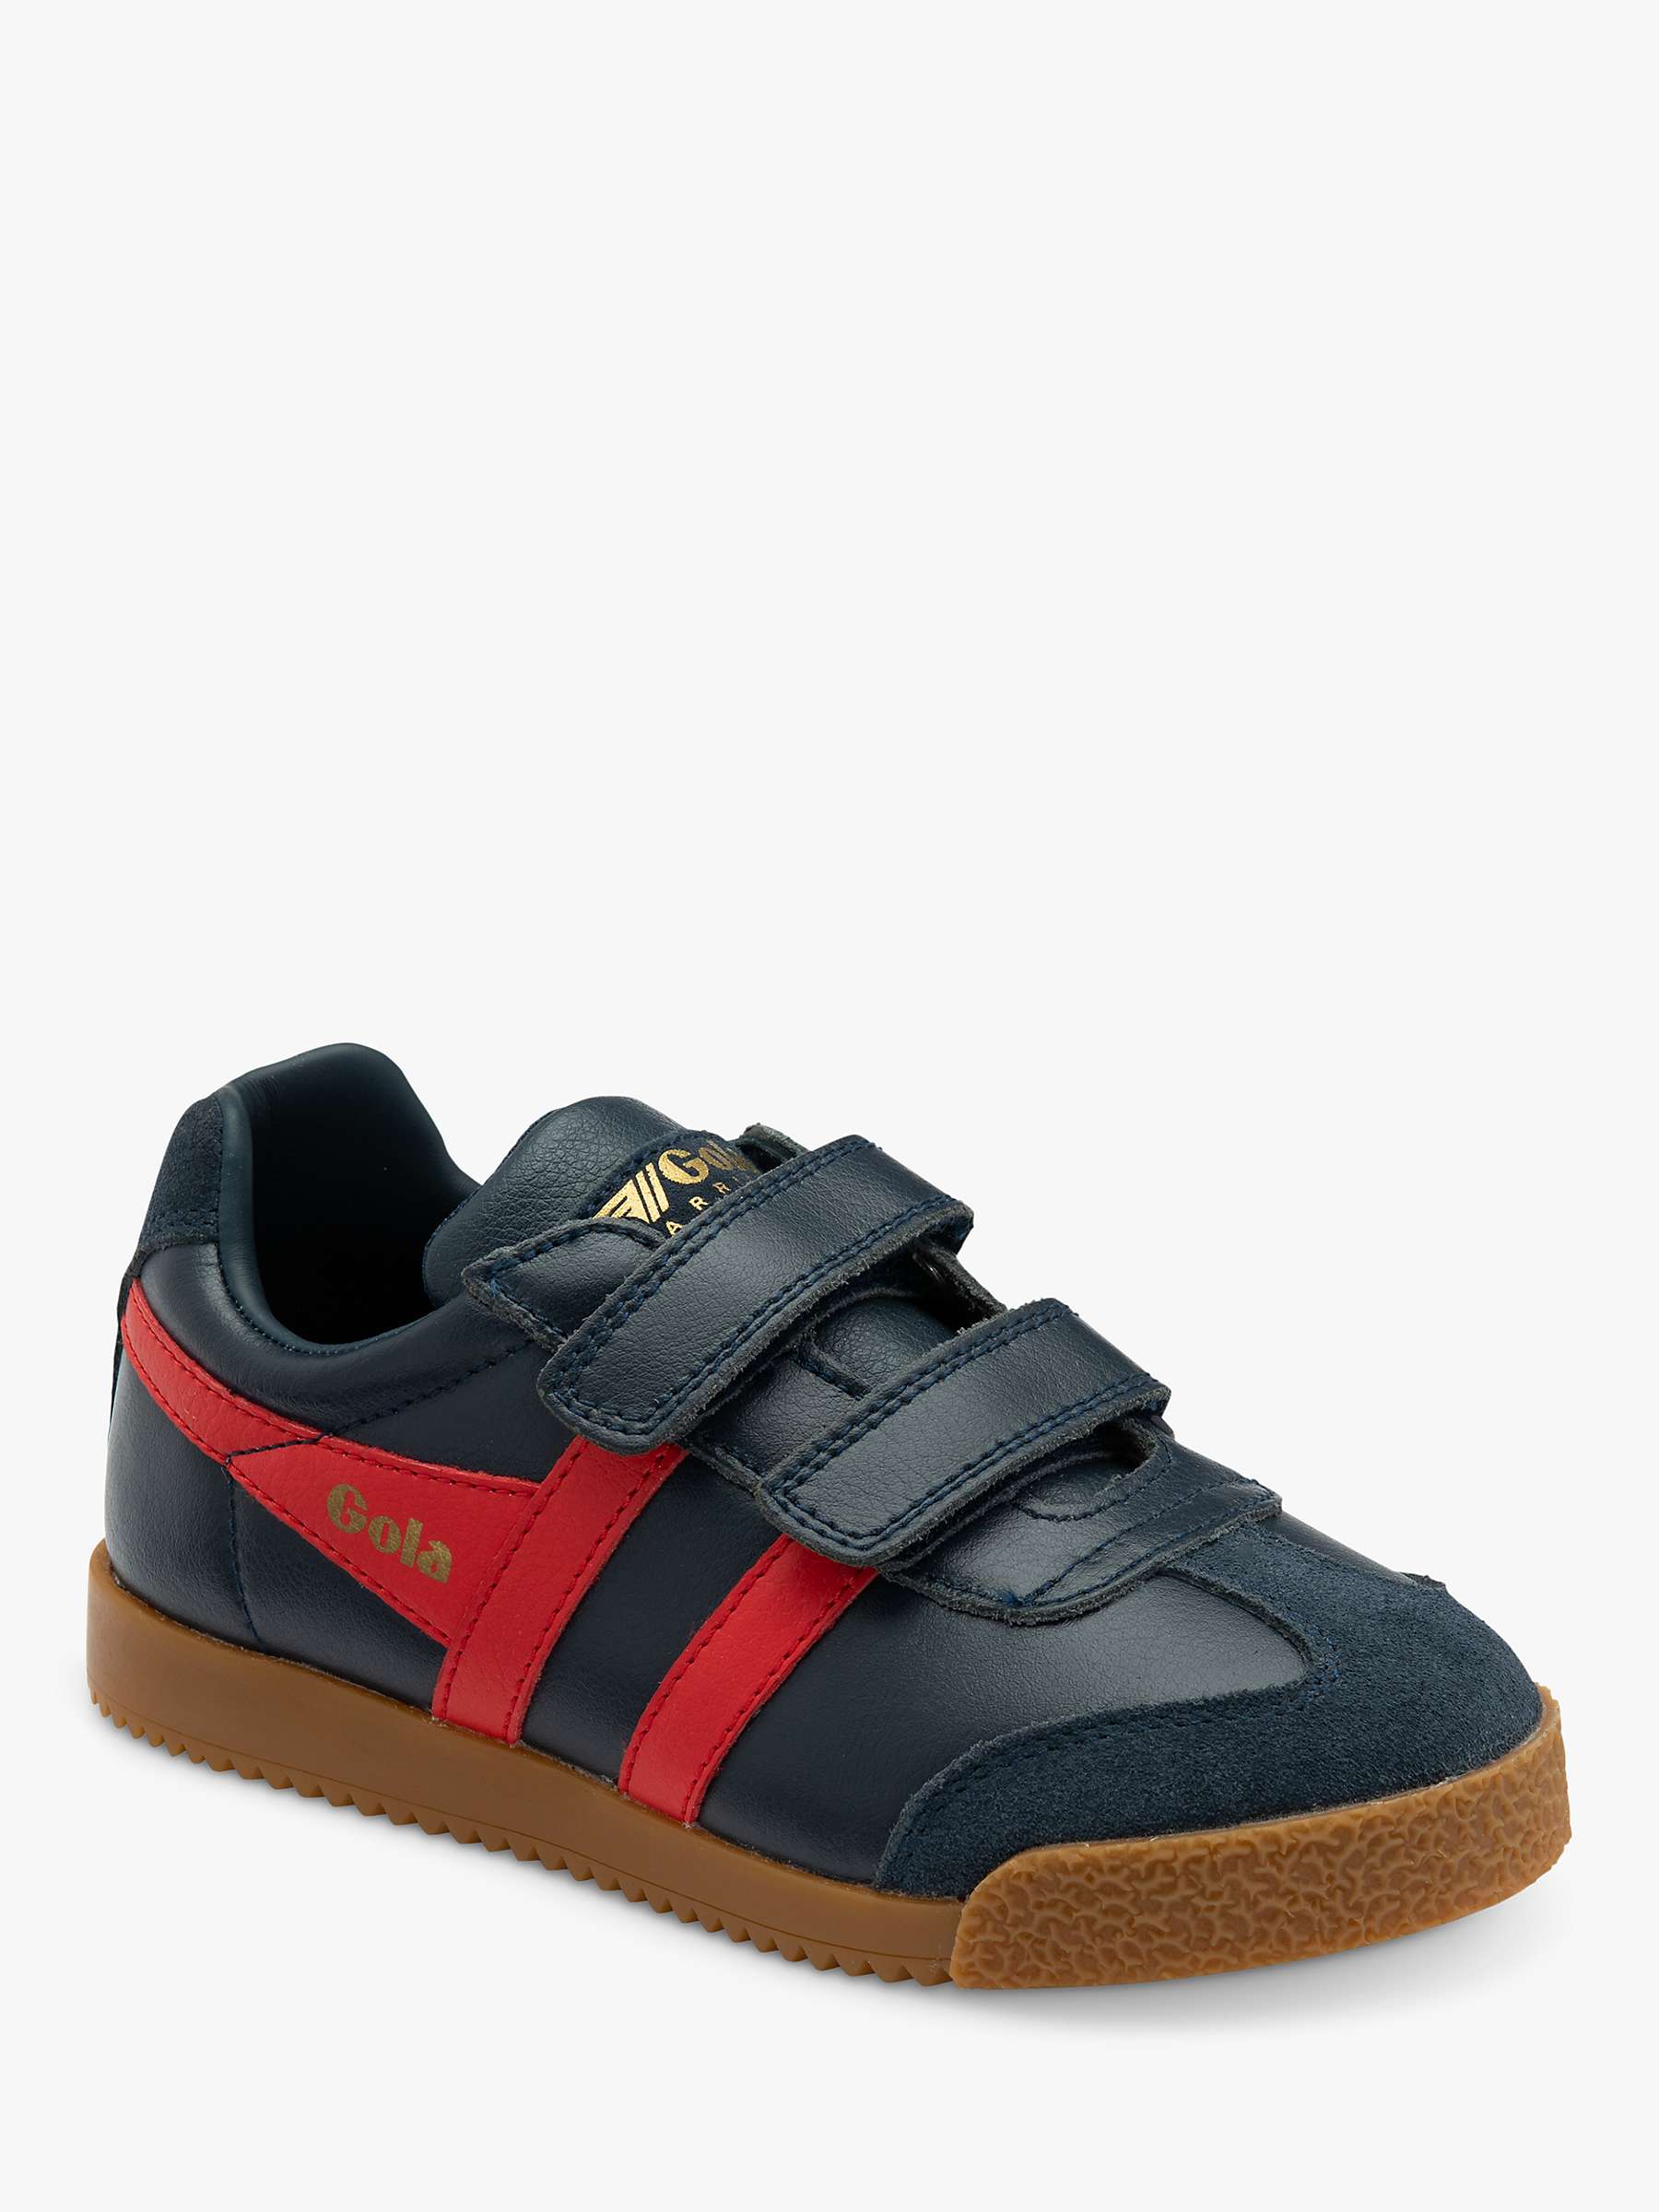 Buy Gola Kids' Classics Harrier Leather Strap Trainers, Navy/Red Online at johnlewis.com